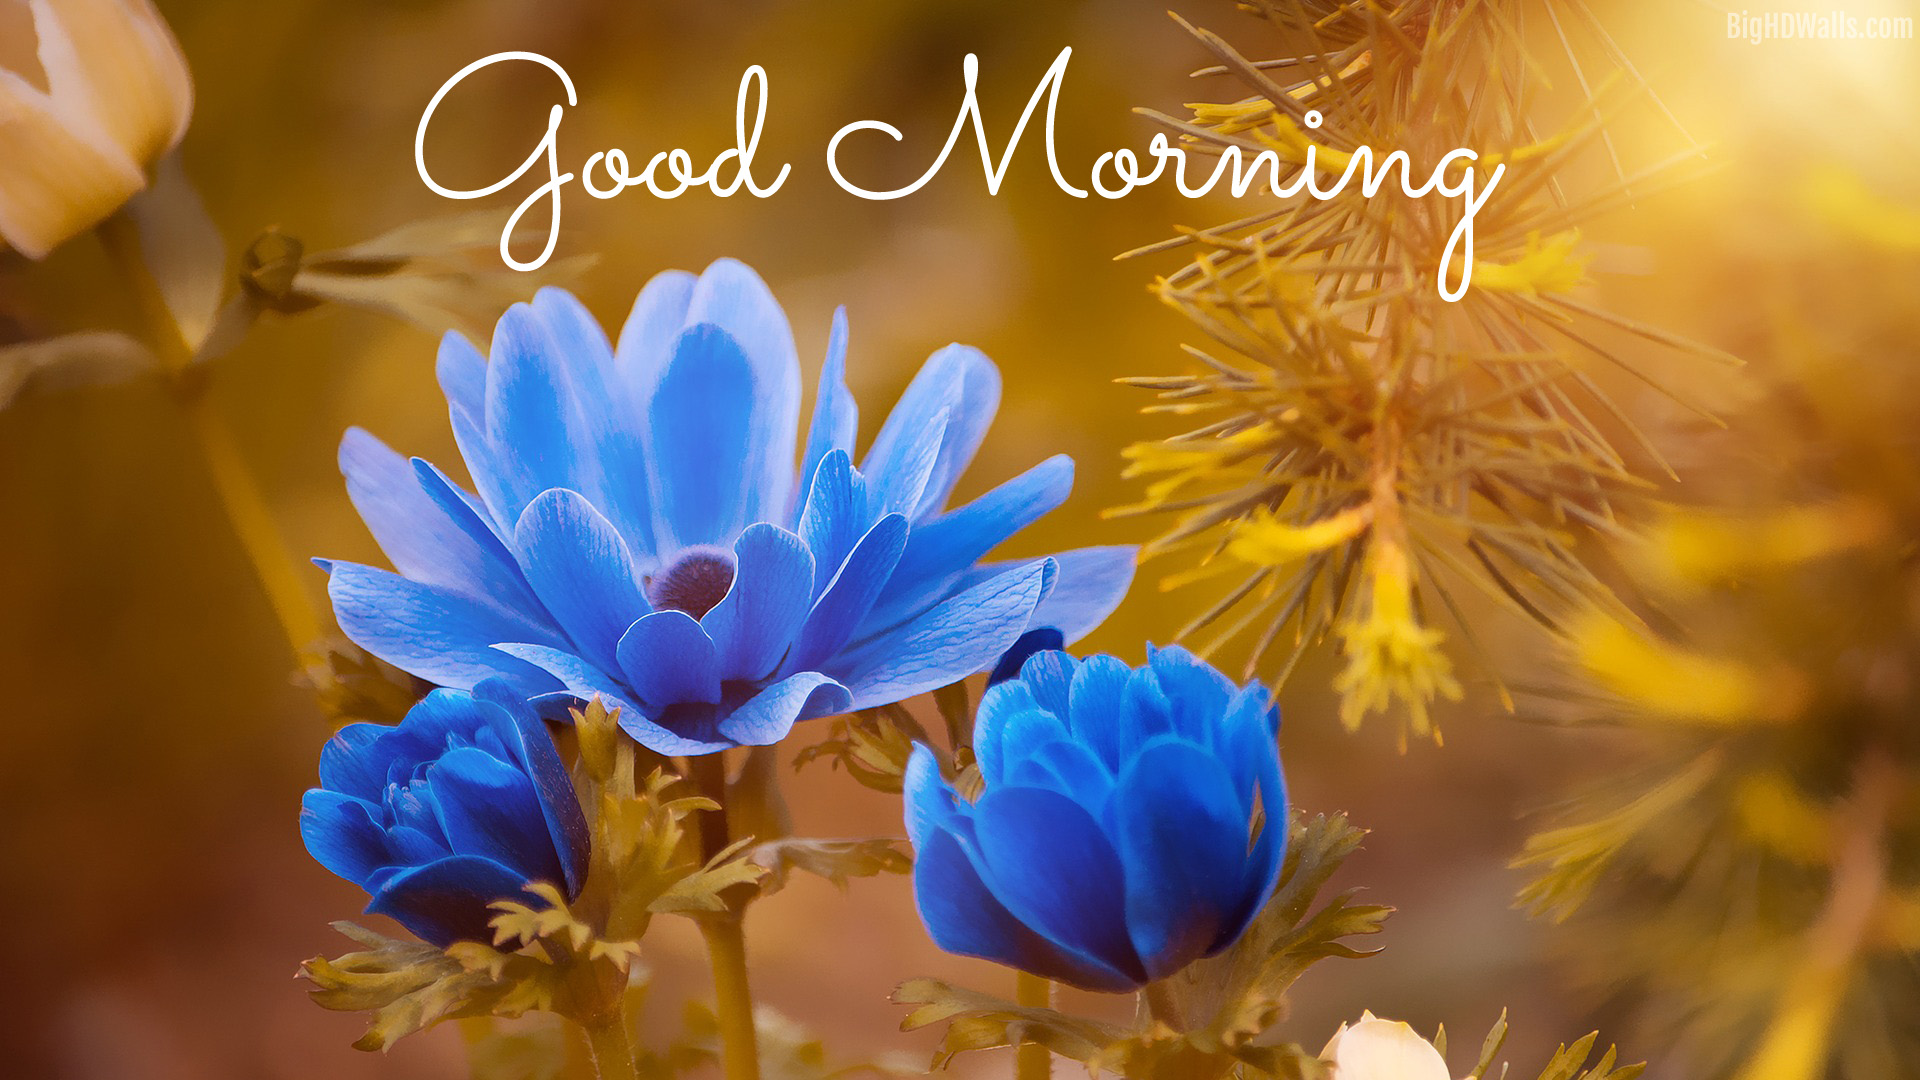 4K Good Morning Wallpapers High Quality | Download Free